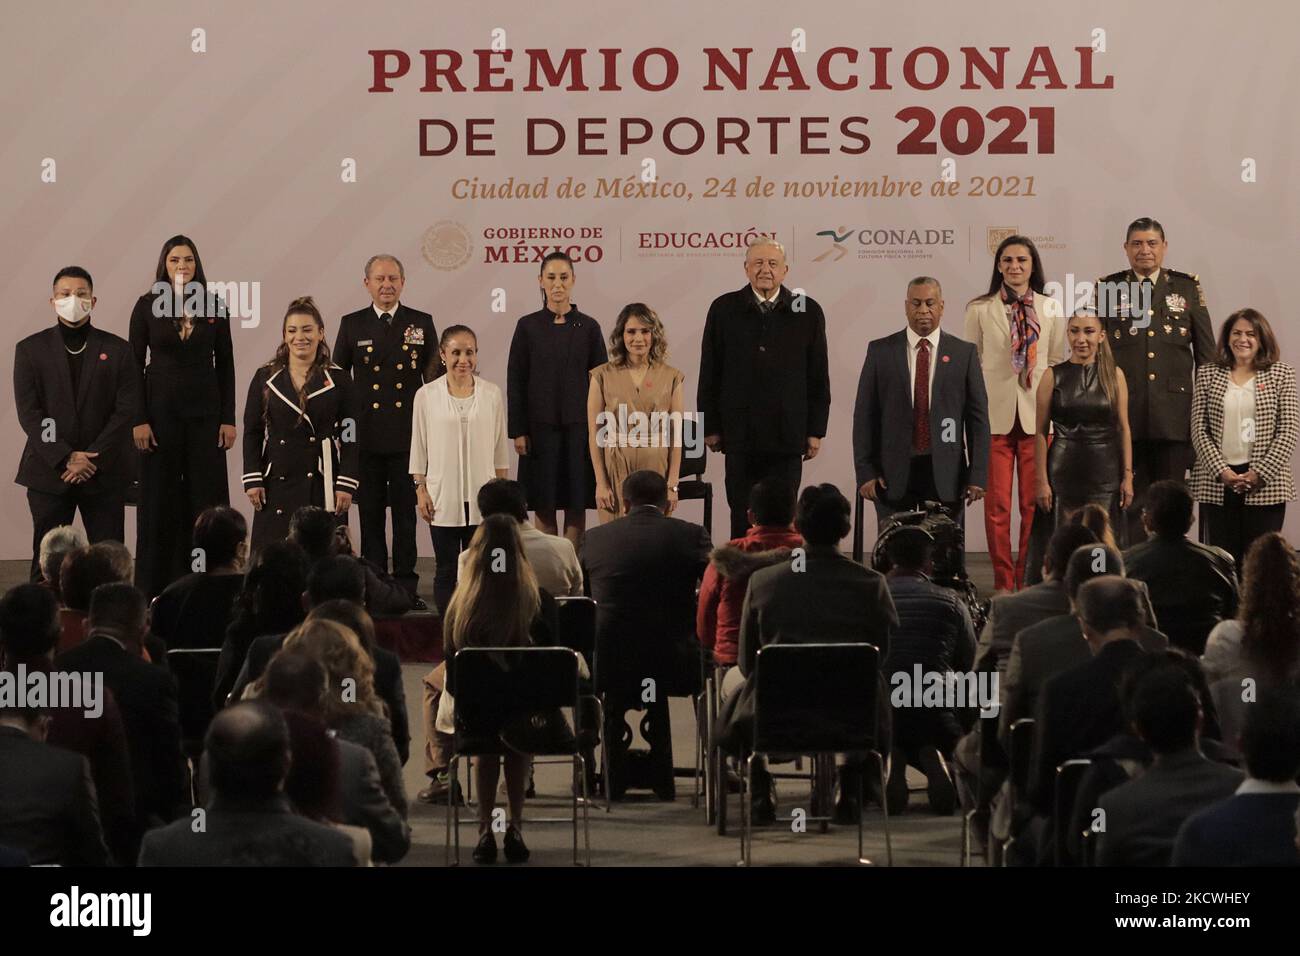 National Sports Award 2021 ceremony to athletes who were selected for this award, which was presented by the President of Mexico, Andrés Manuel López Obrador. The high-performance athletes who were recognised with the National Sports Award 2021 are: -Aremi Fuentes Zavala, weightlifting (bronze medal at the Tokyo Olympics). -Julio César Urías Acosta, baseball (Los Angeles Dodgers baseball player). -Mónica Olivia Rodríguez Saavedra, athletics. -Jannet Alegría Peña, Paralympic taekwondo. -José Manuel Zayas, weightlifting. -Mayte Ivonne Chávez García, professional football. -María del Rosario Espi Stock Photo